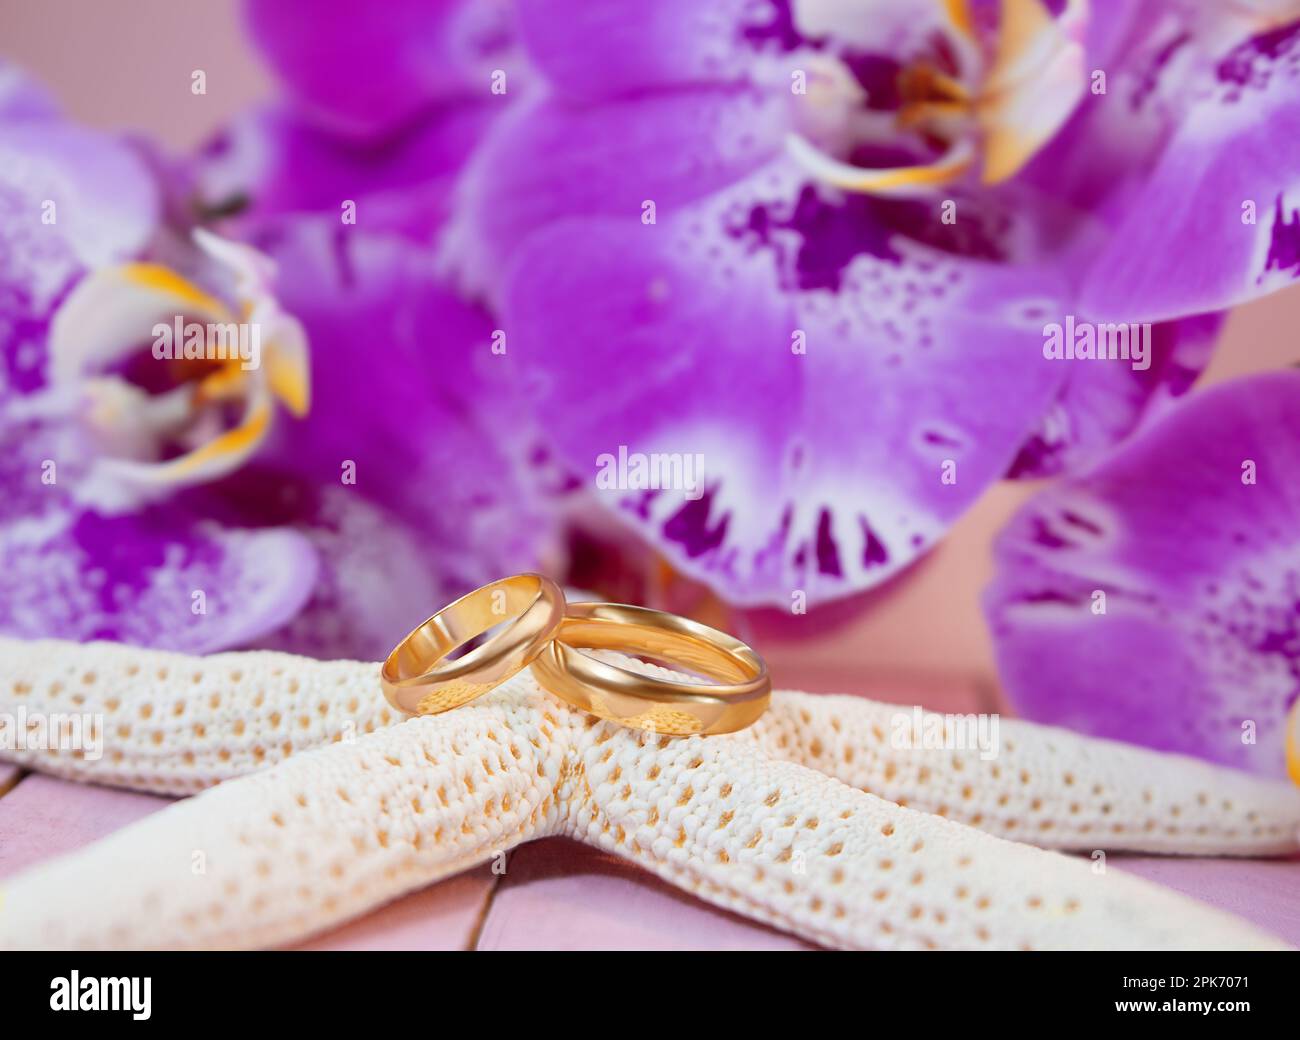 Golden wedding rings on white starfish behind purple orchids on pink wooden board. Celebrations, ceremonies, honeymoon Stock Photo